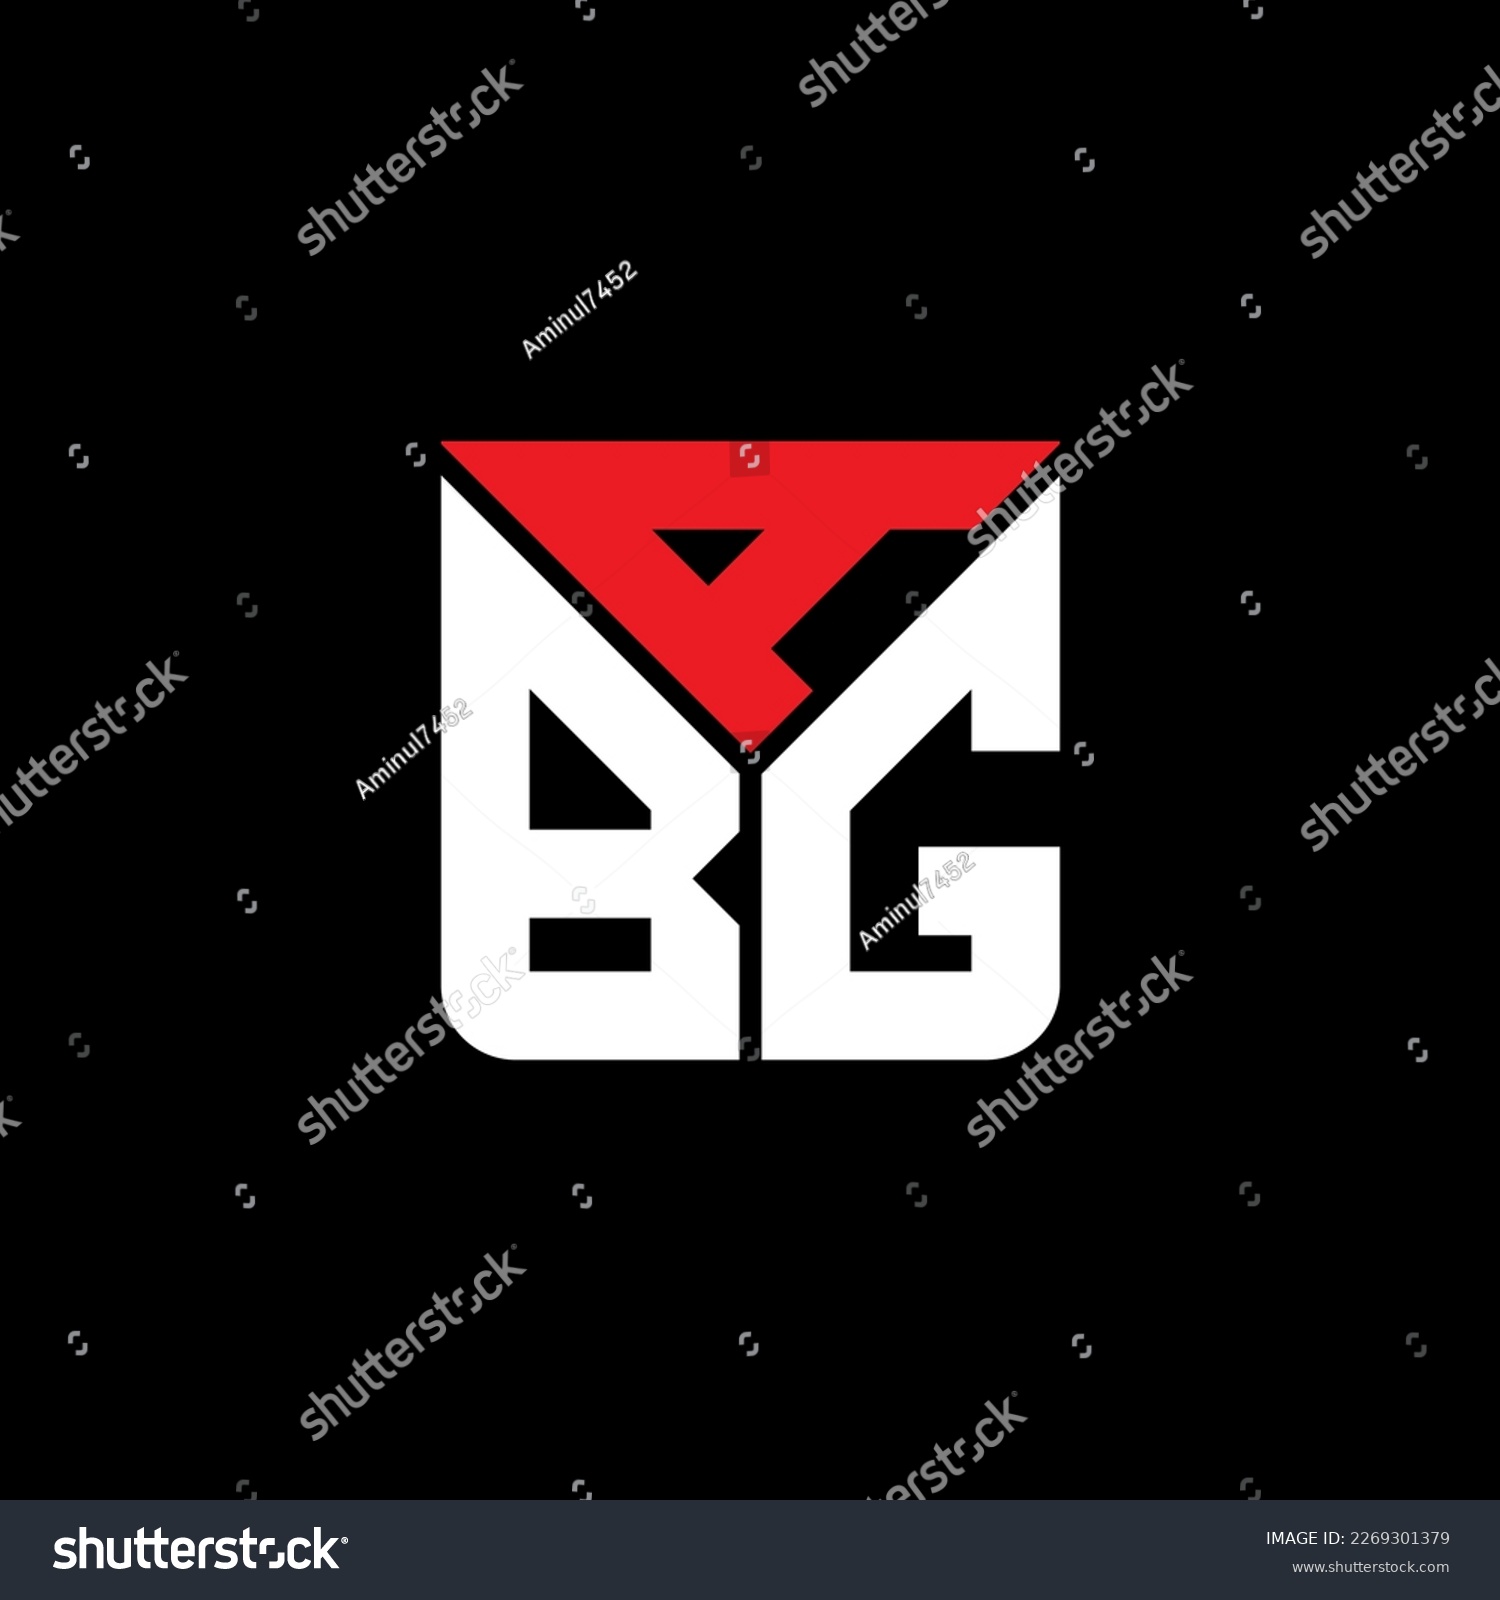 SVG of ABG letter logo creative design with vector graphic, ABG simple and modern logo. svg